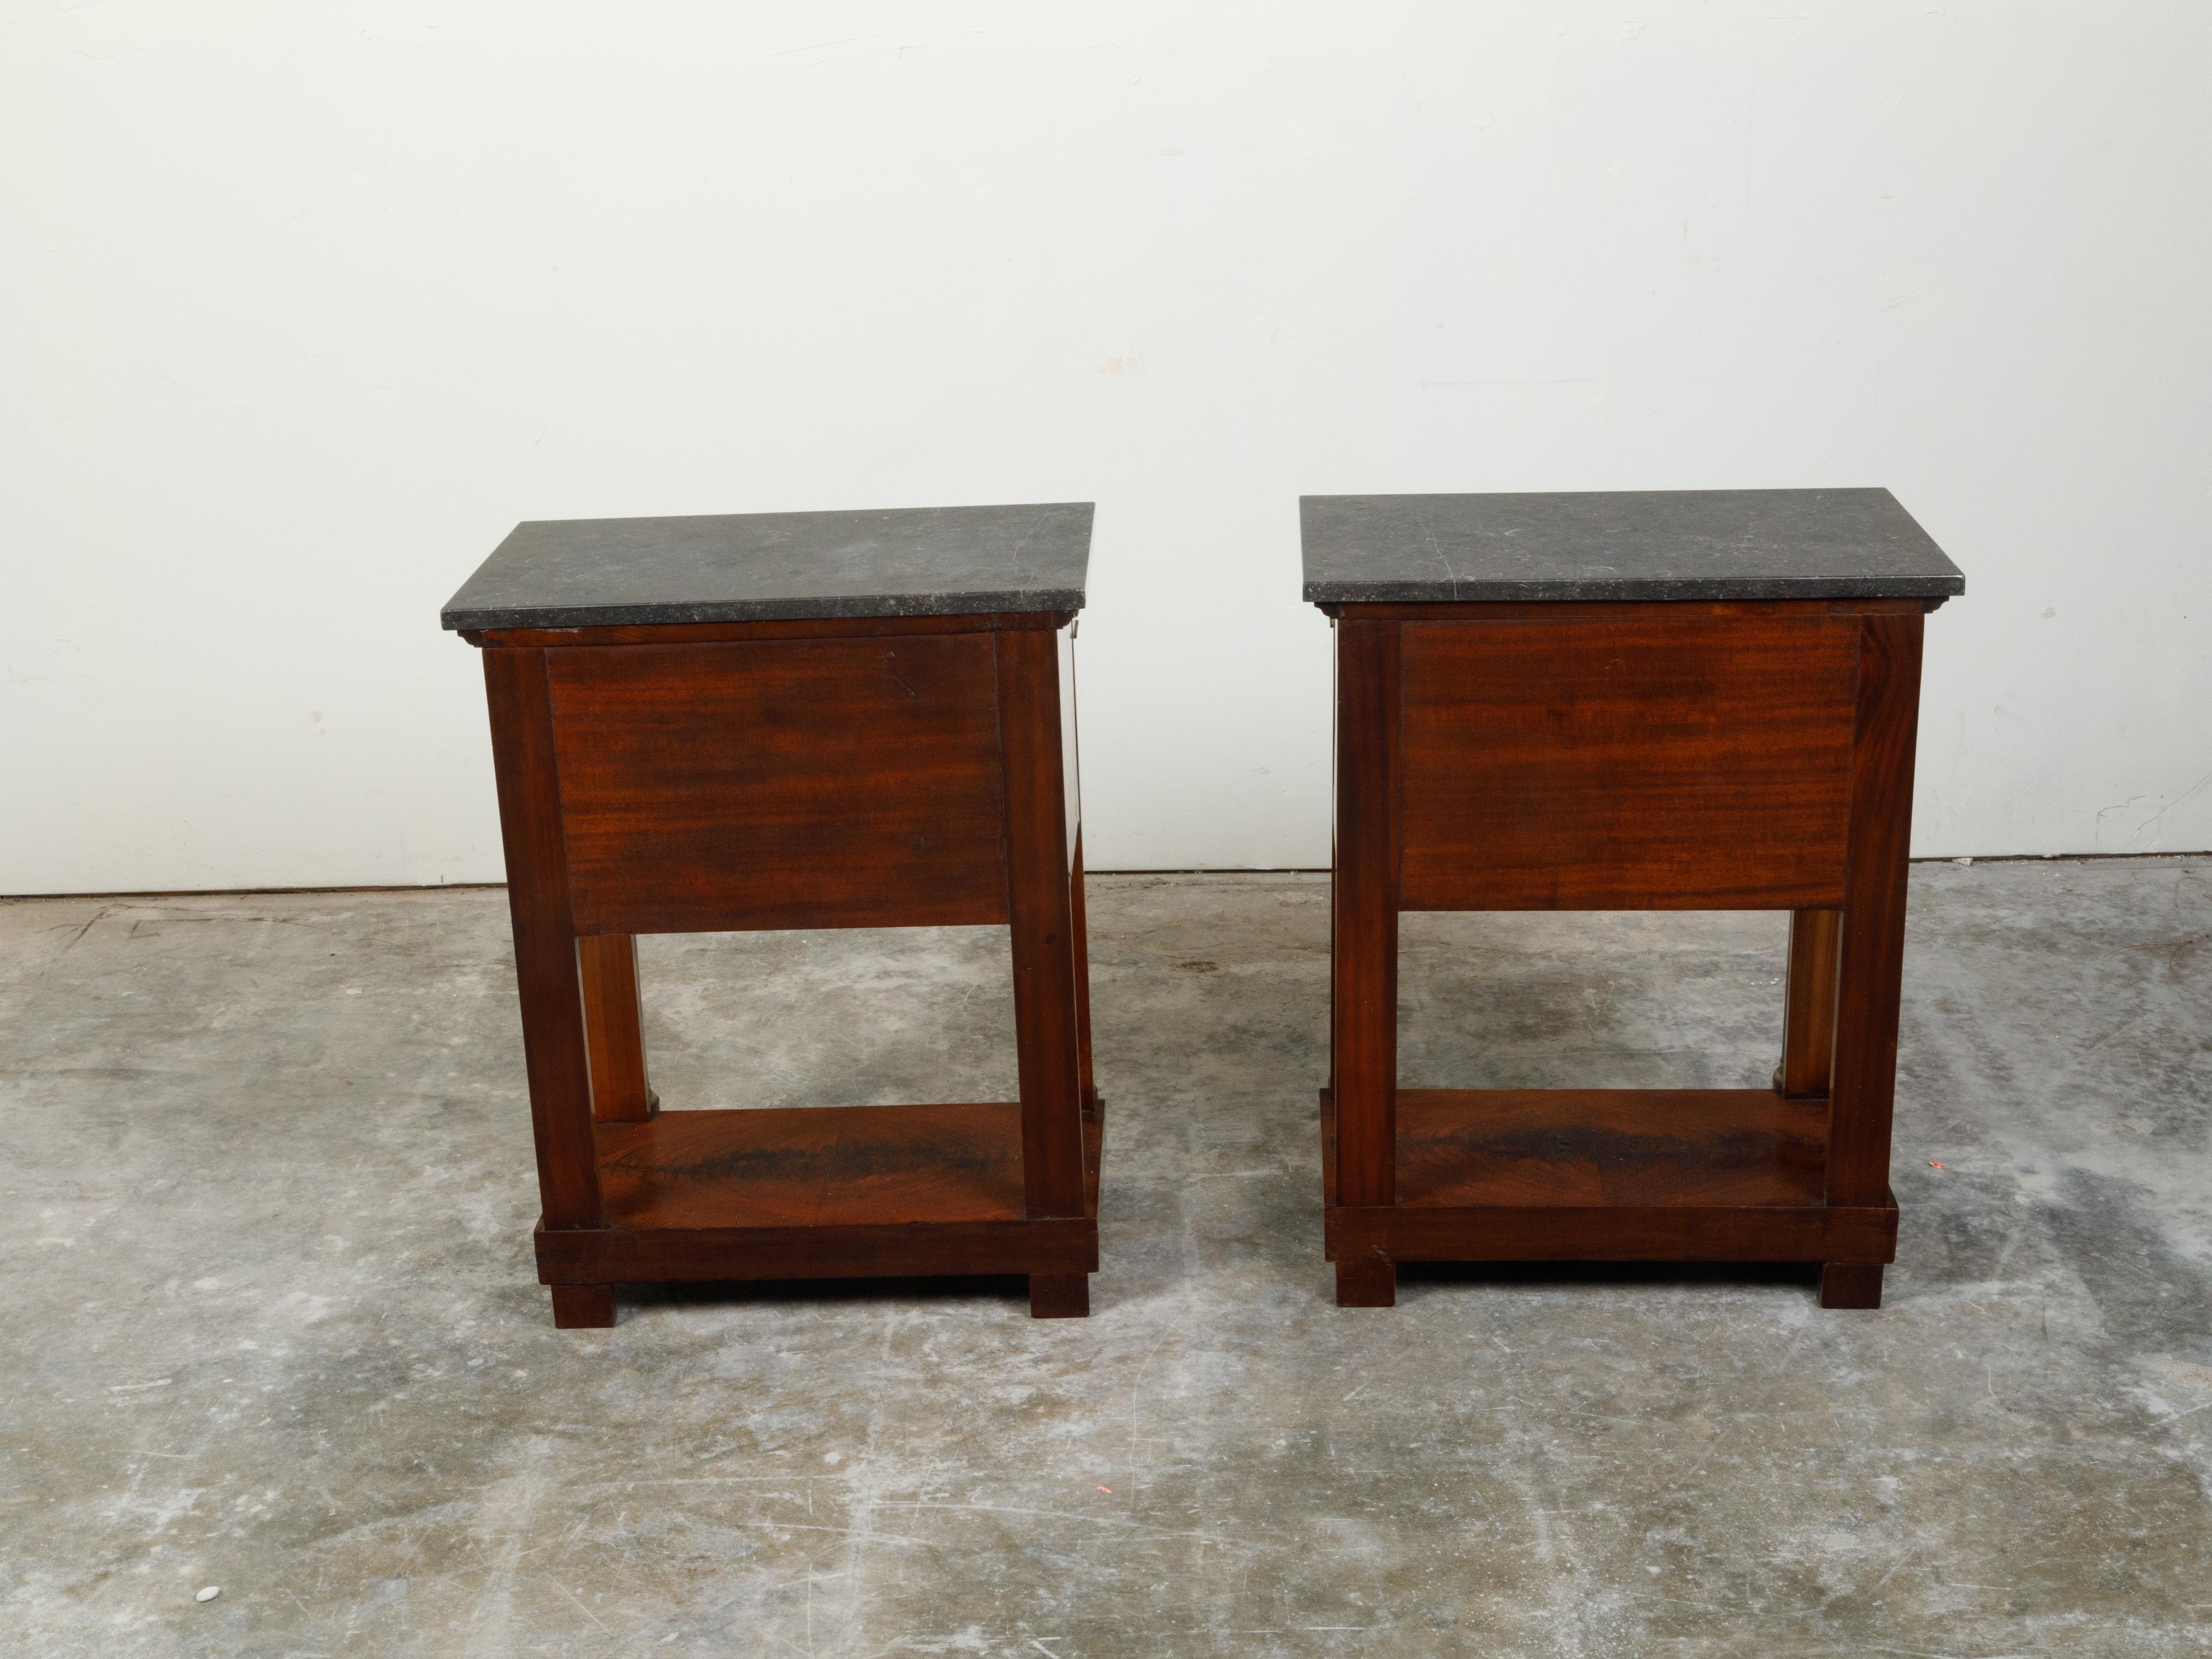 French Empire Early 19th Century Walnut Console Tables with Grey Marble Tops For Sale 2